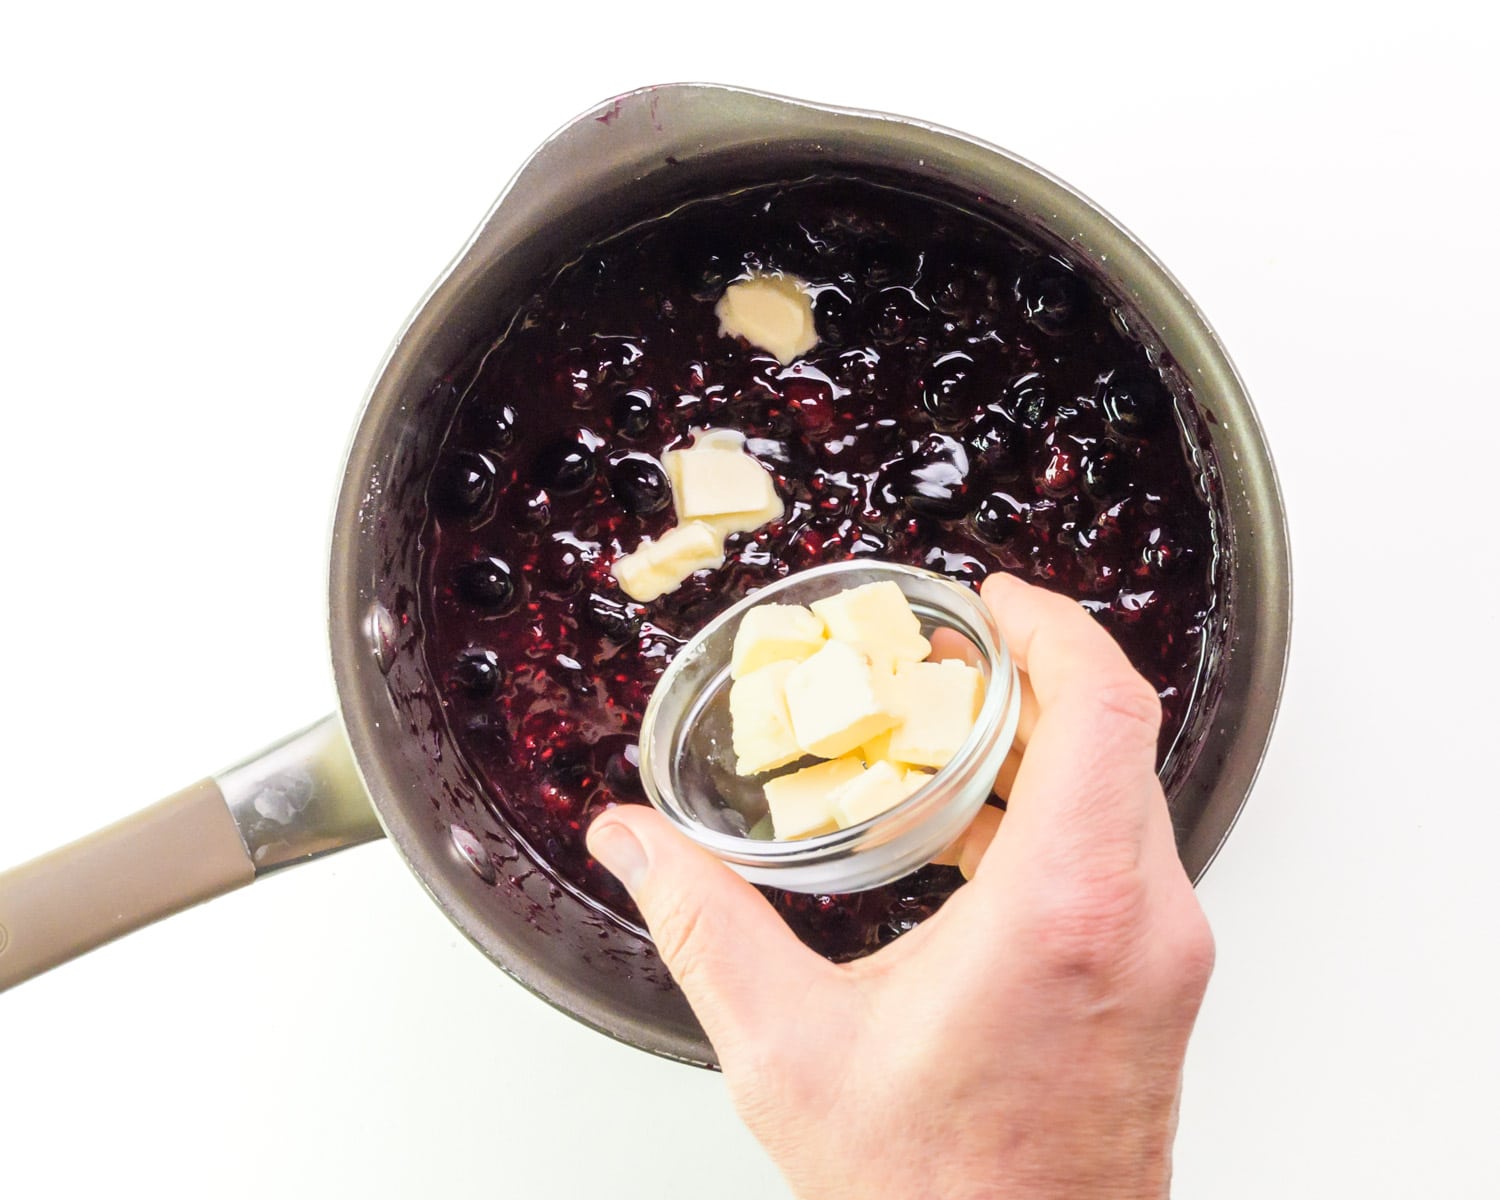 Vegan butter being poured from a bowl into a saucepan with berry sauce.